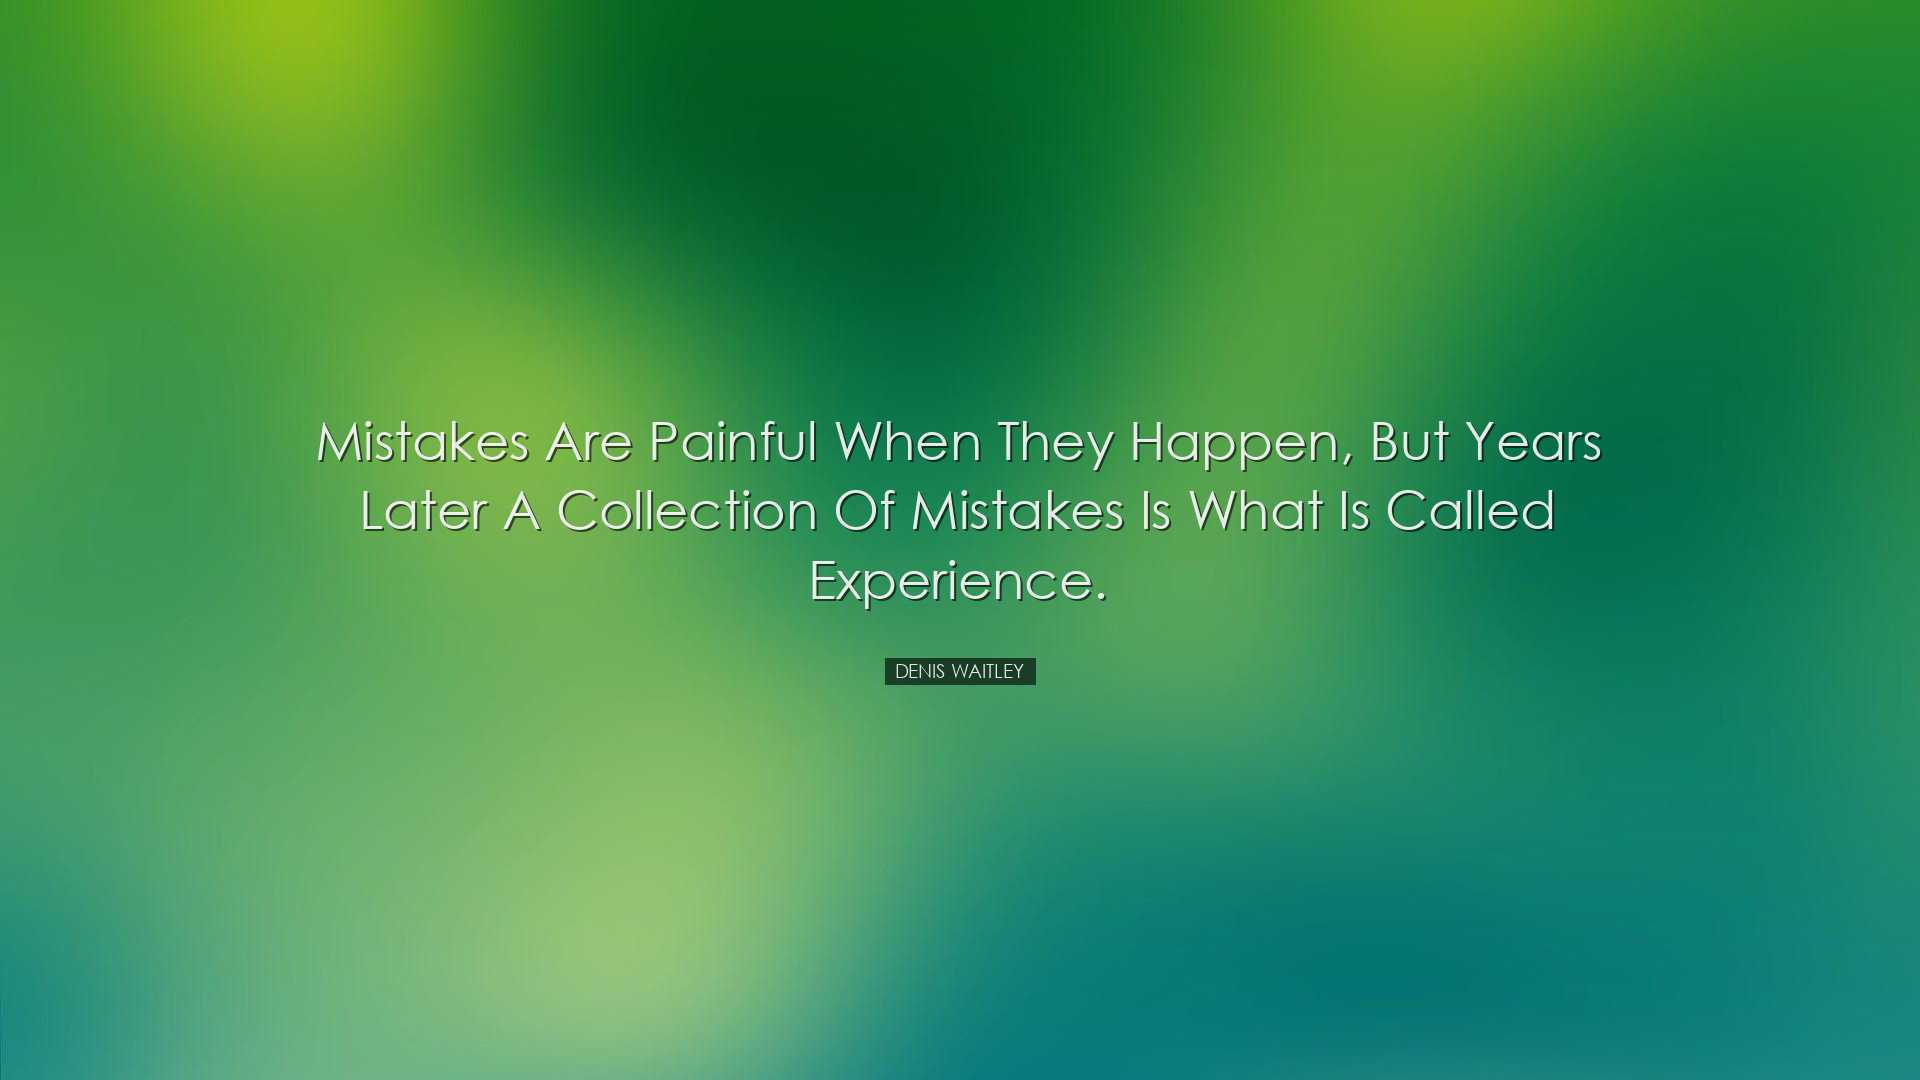 Mistakes are painful when they happen, but years later a collectio